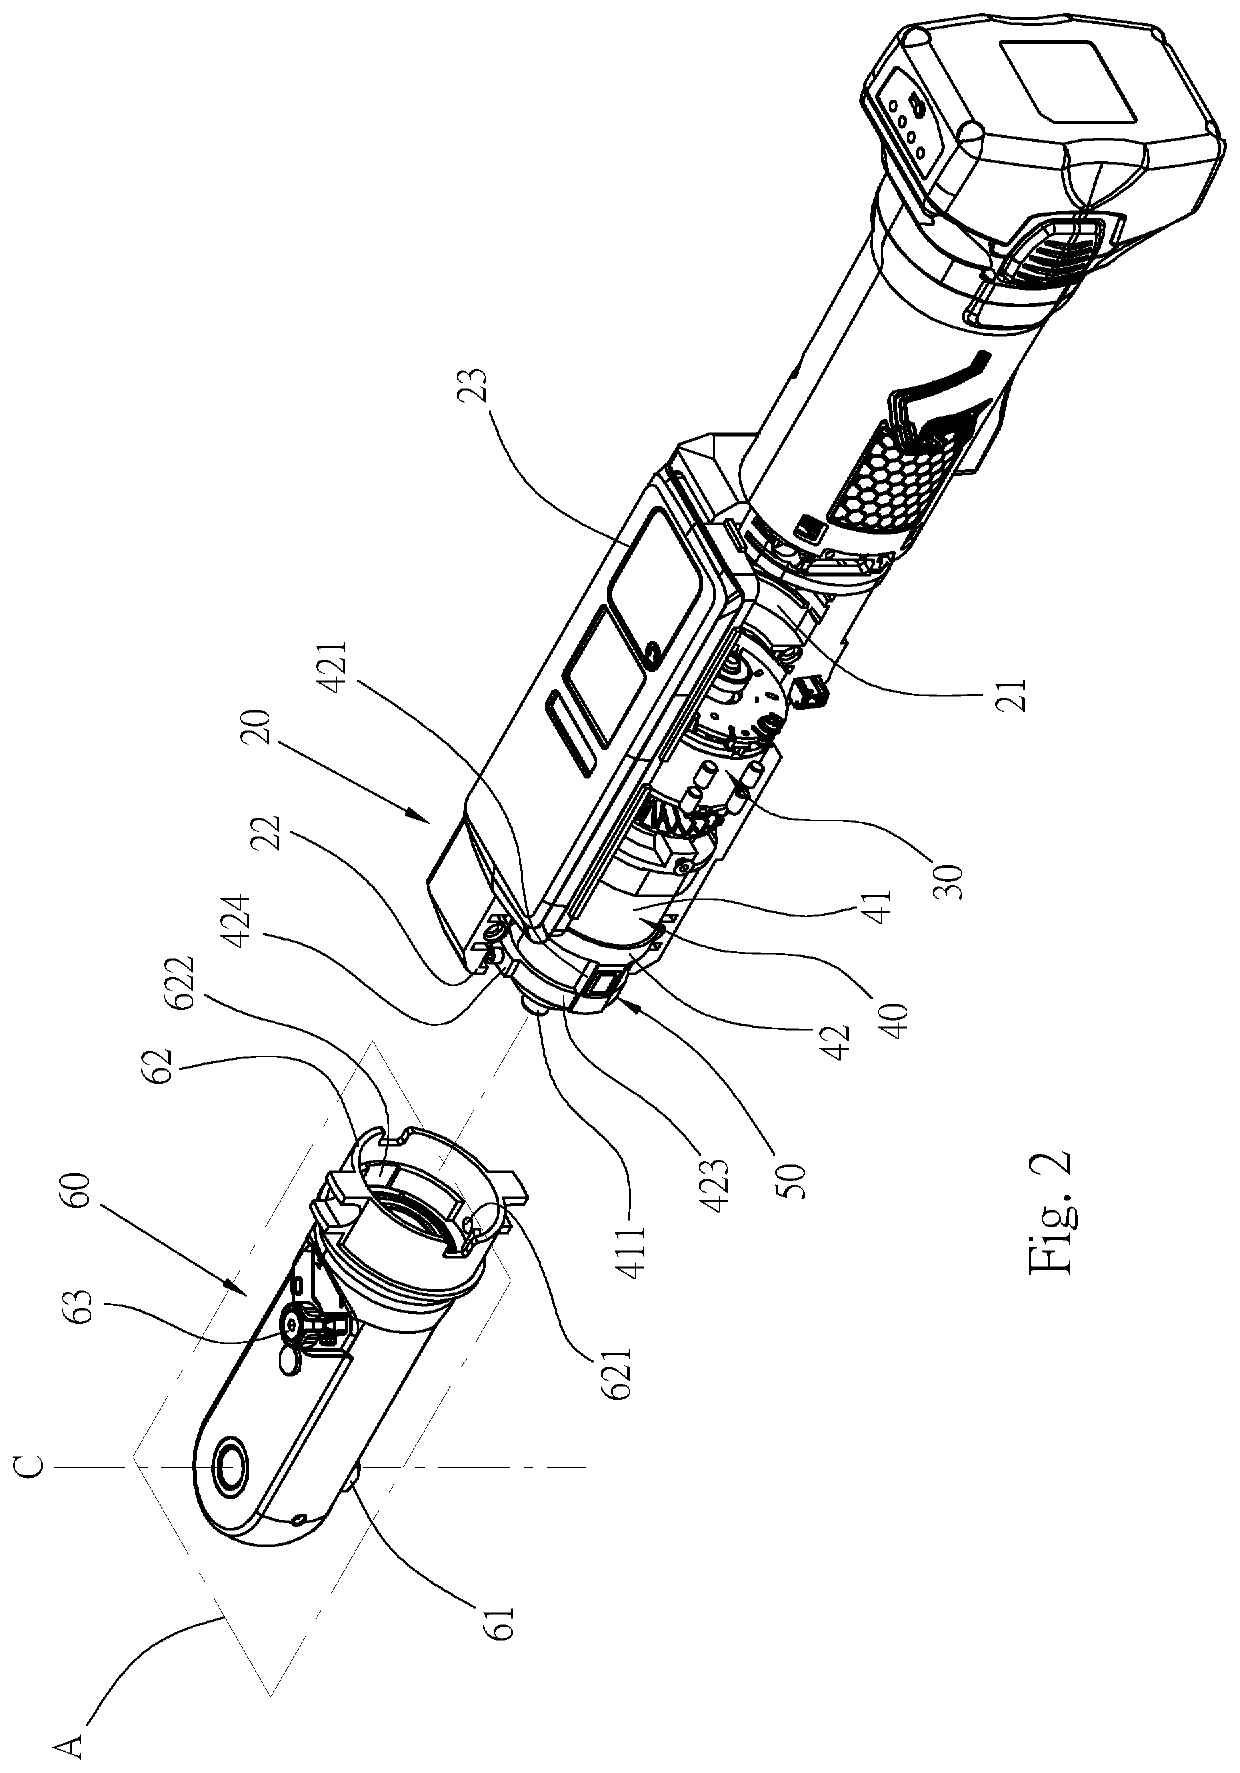 Electric torque wrench capable of sensing manual operating torque